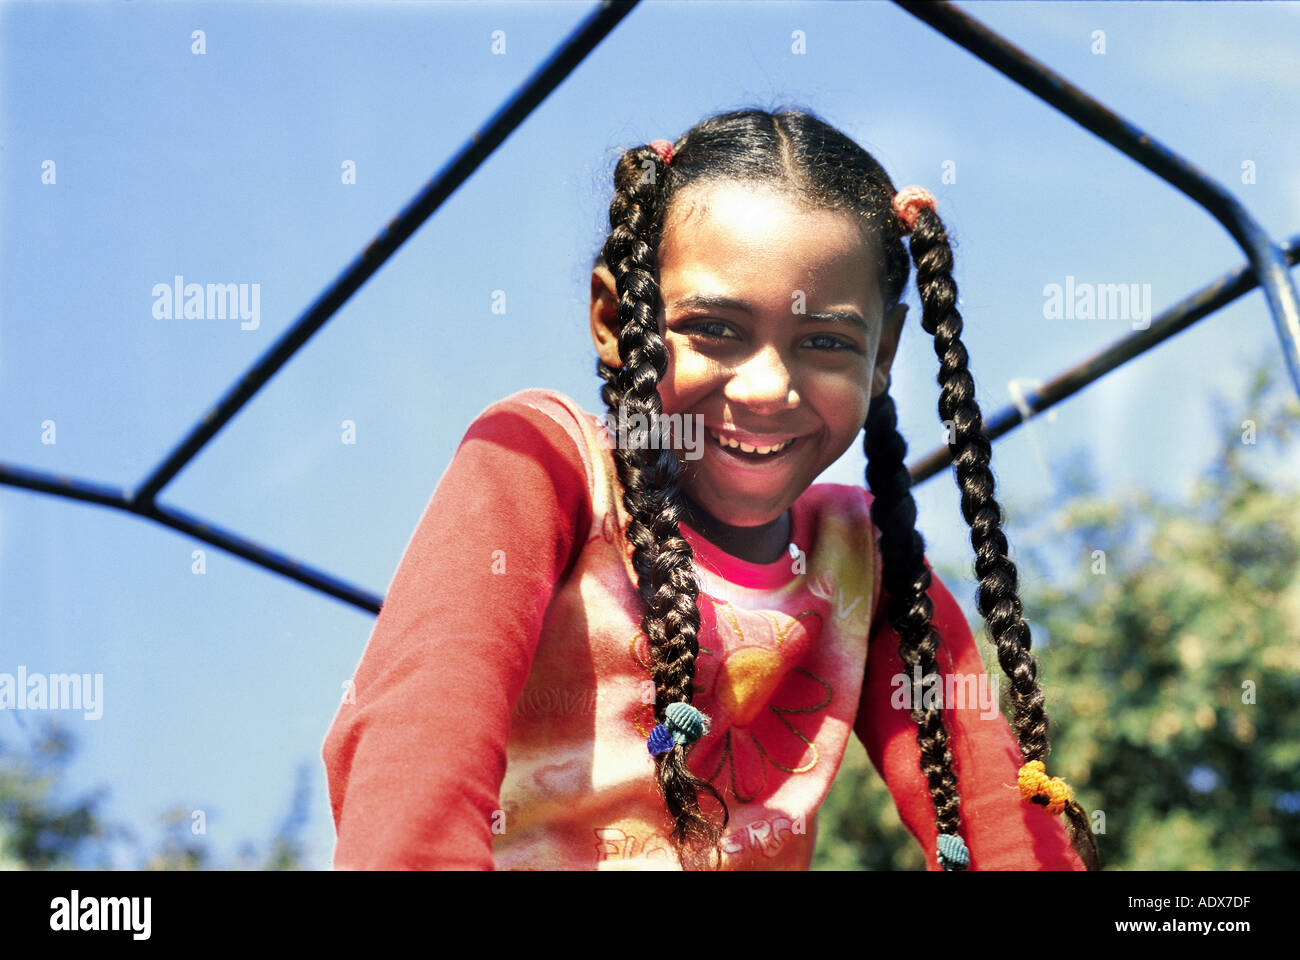 Children girl iron bars climbing frame smile smiling braid braids braided hair happy fun happiness expression emotion people per Stock Photo